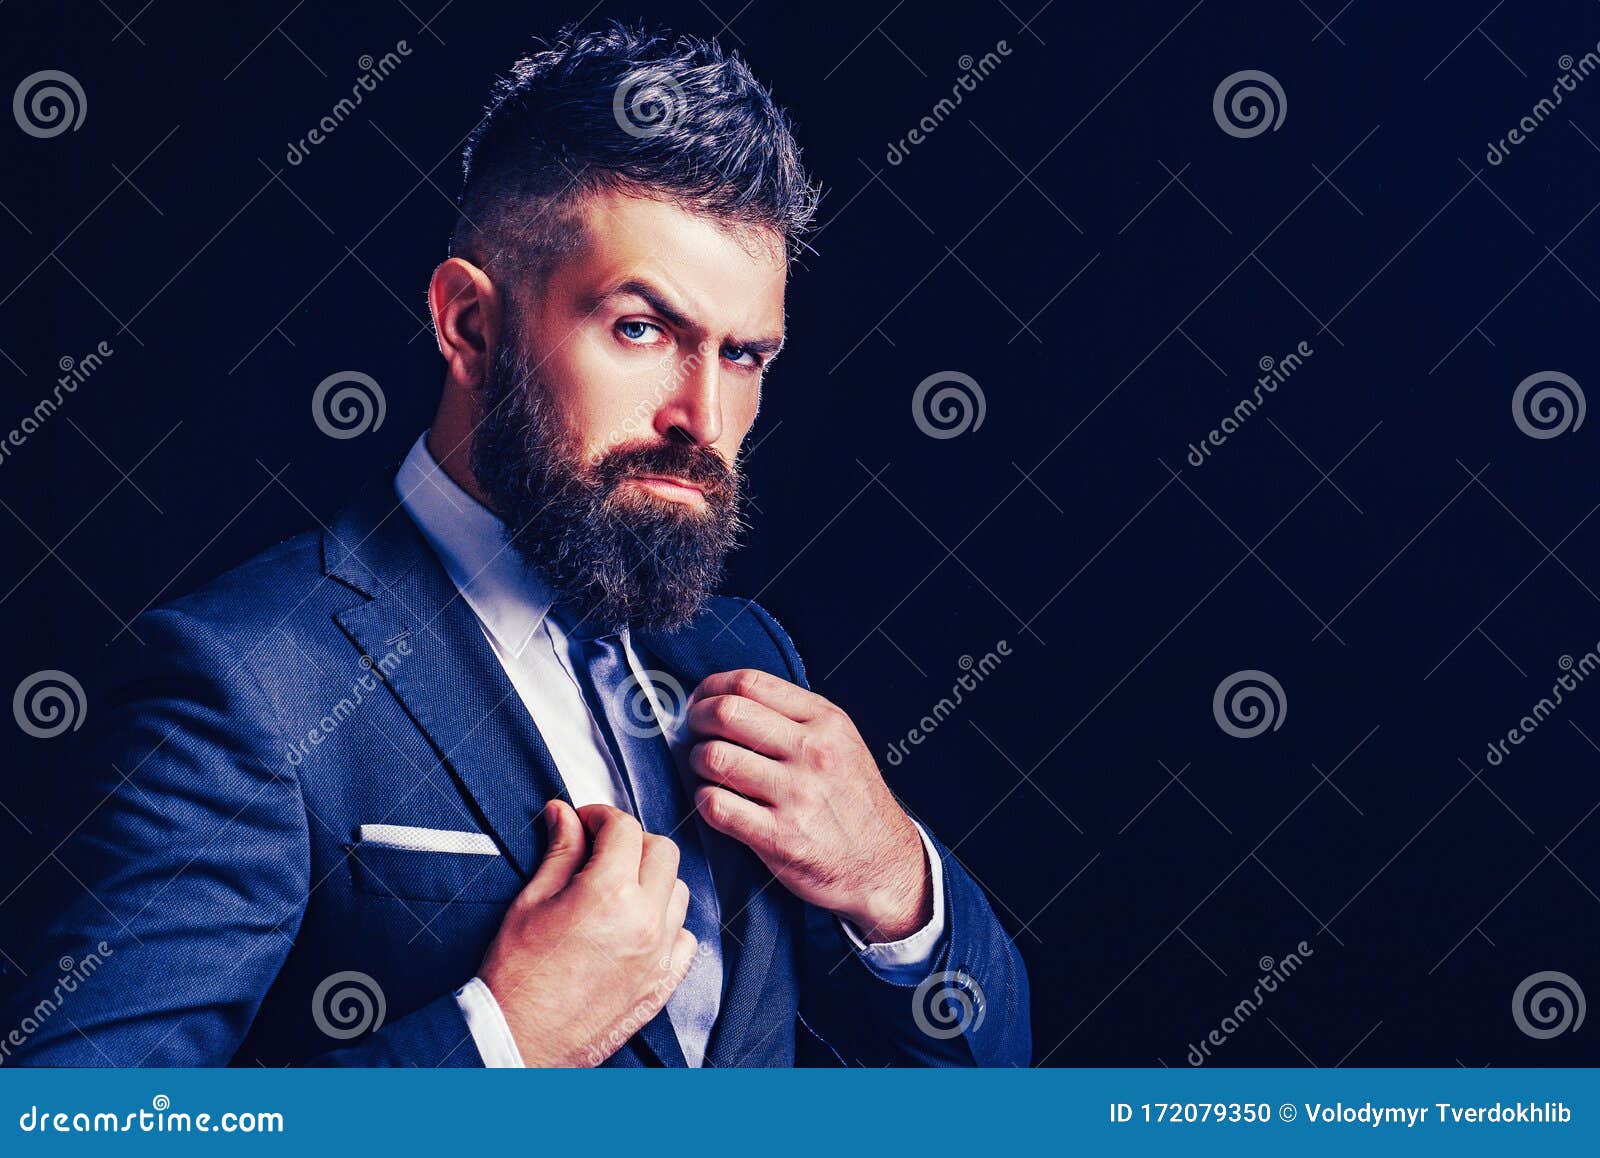 rich bearded man dressed in classic suits. elegance casual dress. fashion suit. luxury mens clothing. man in suit